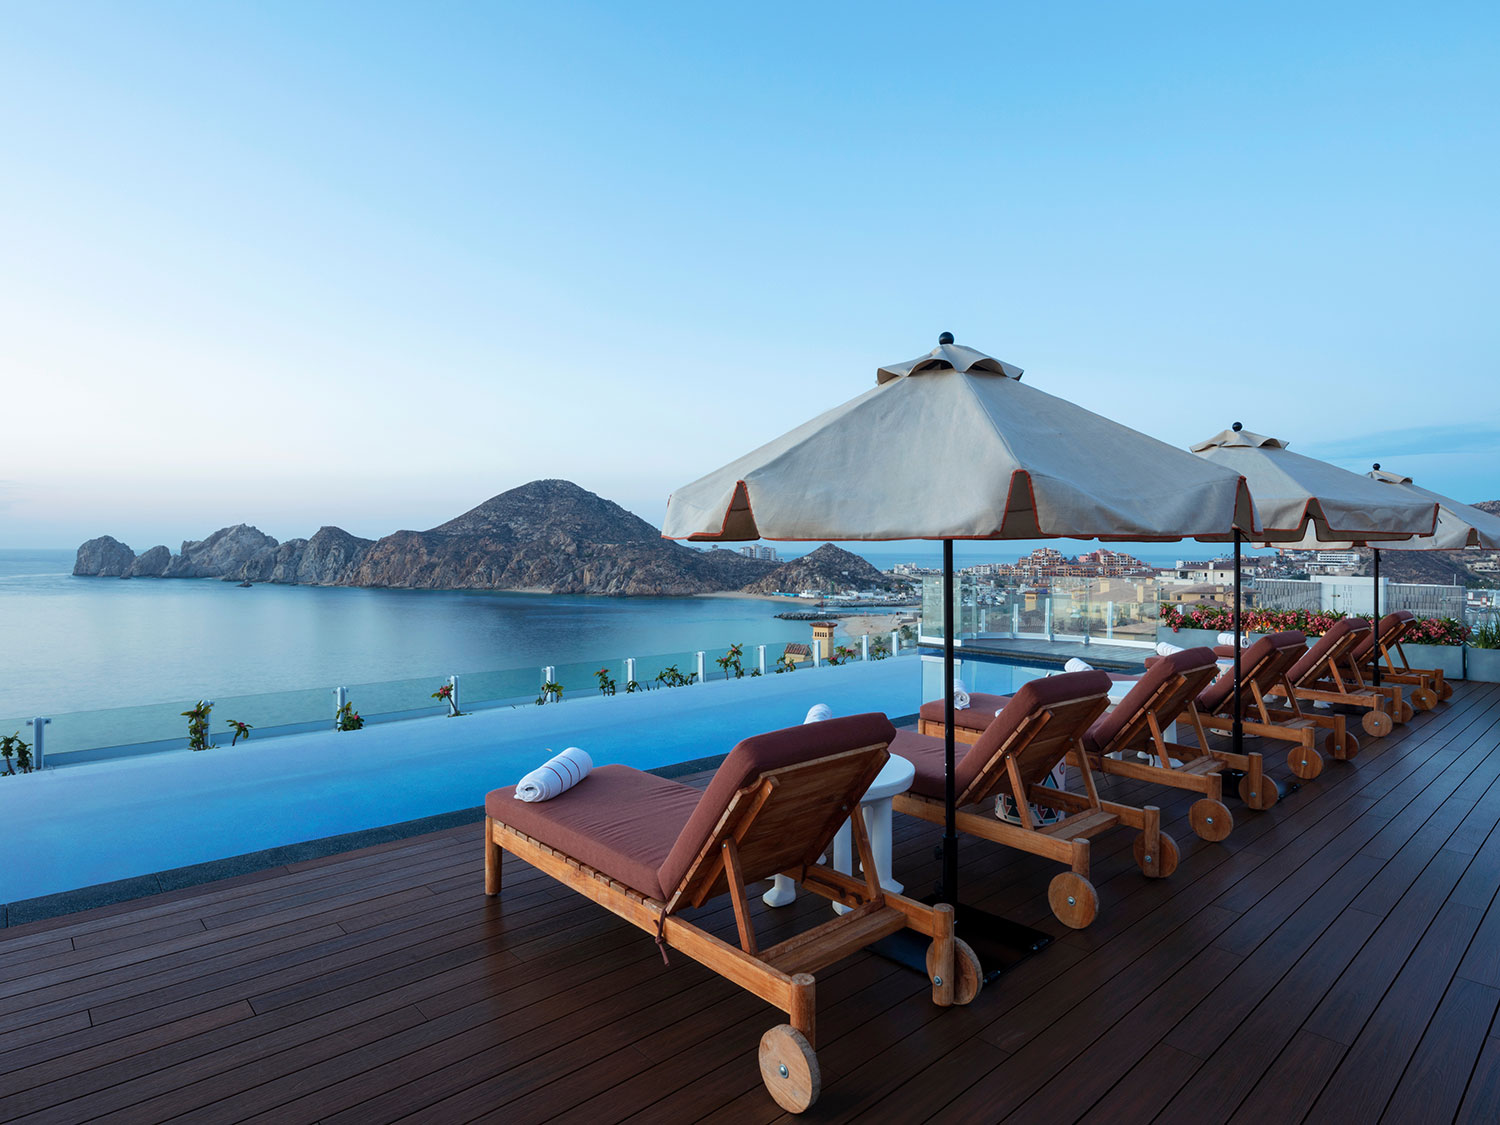 The elevated pool and view from the Corazon Cabo resort in Mexico.